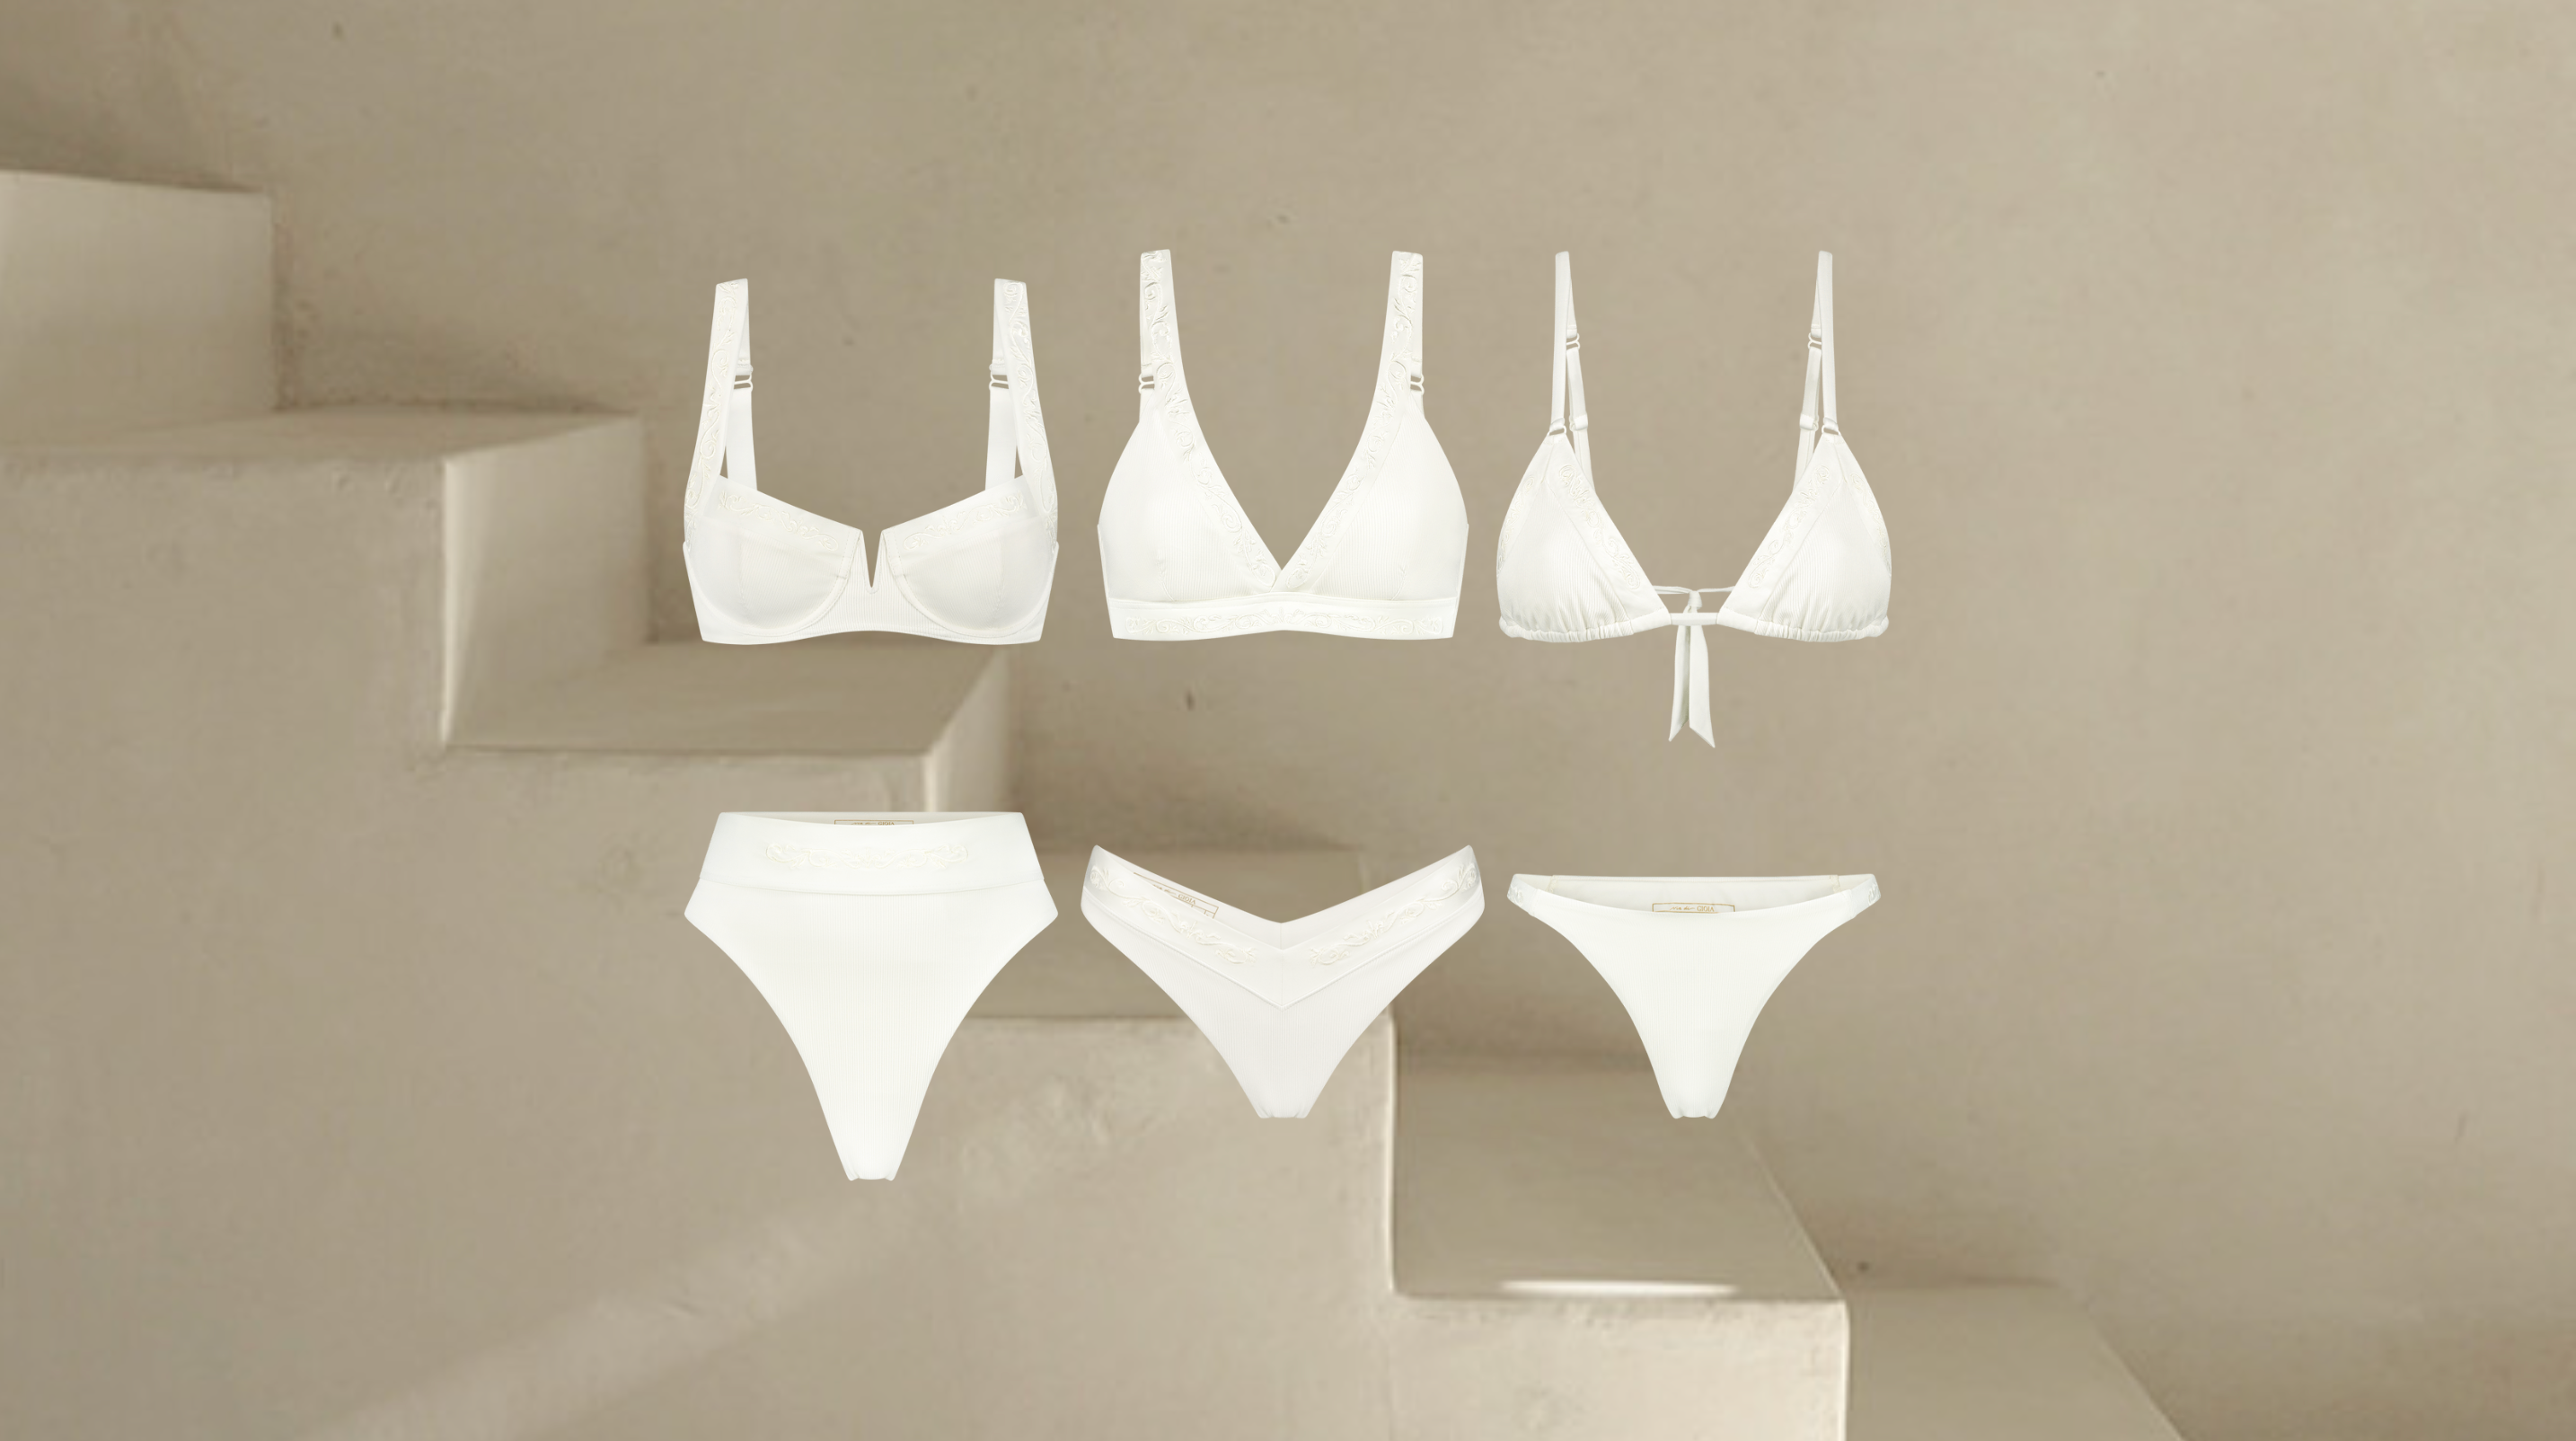 All bikini sets in ivory white with staircase background